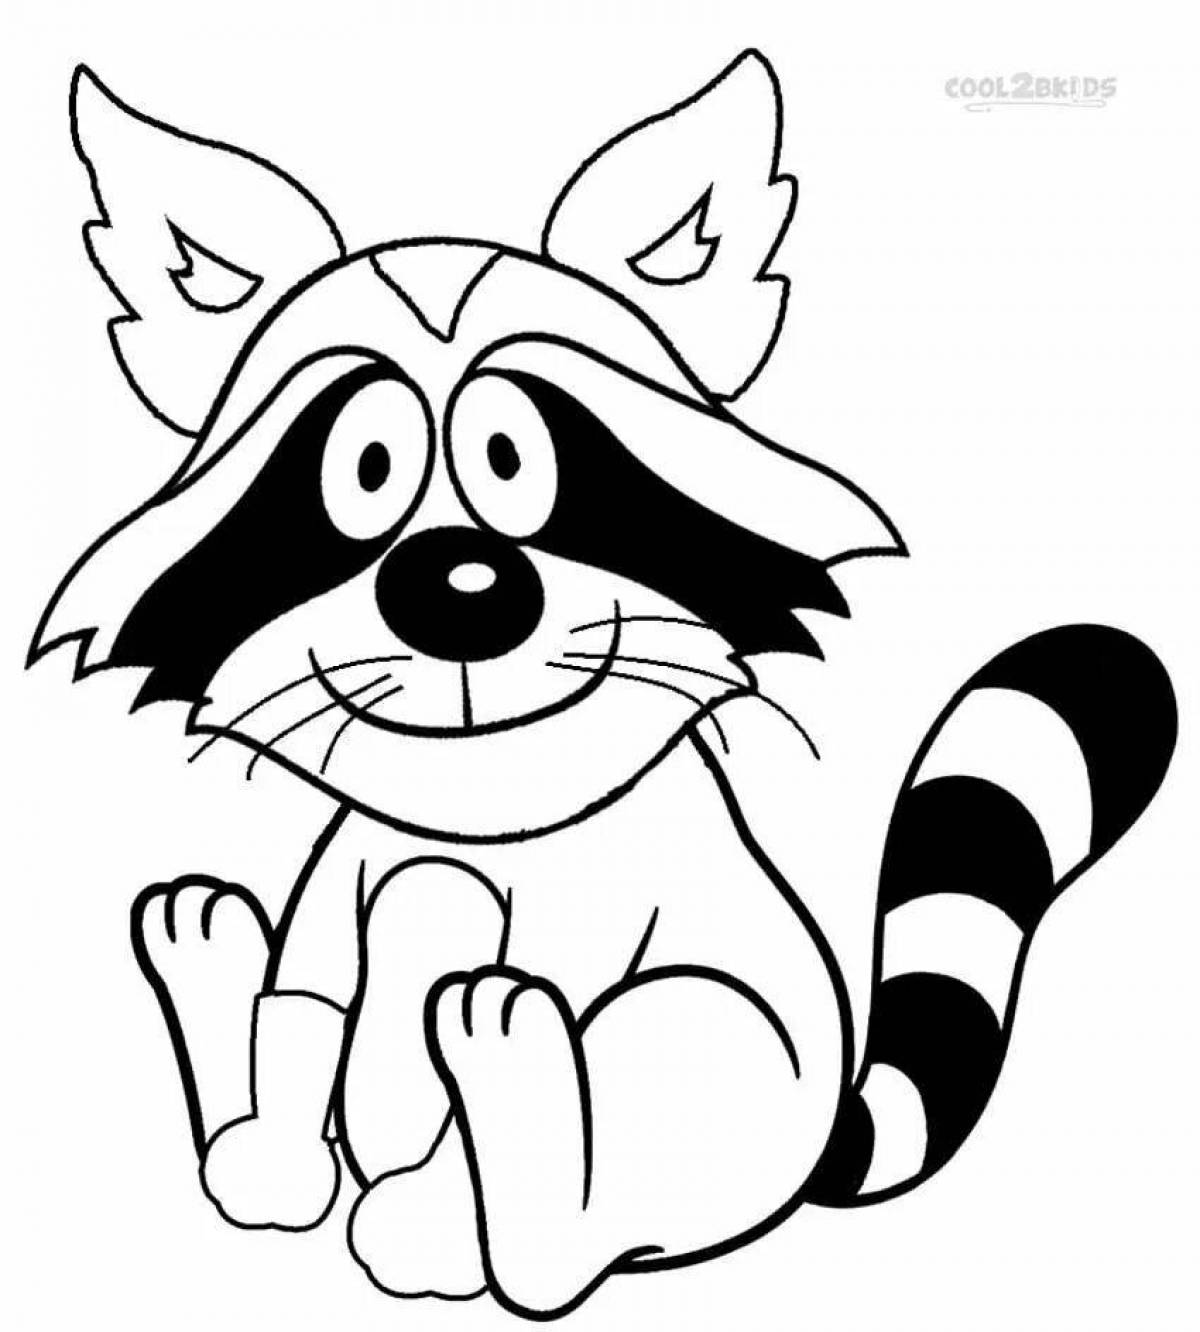 Coloring page holiday raccoon